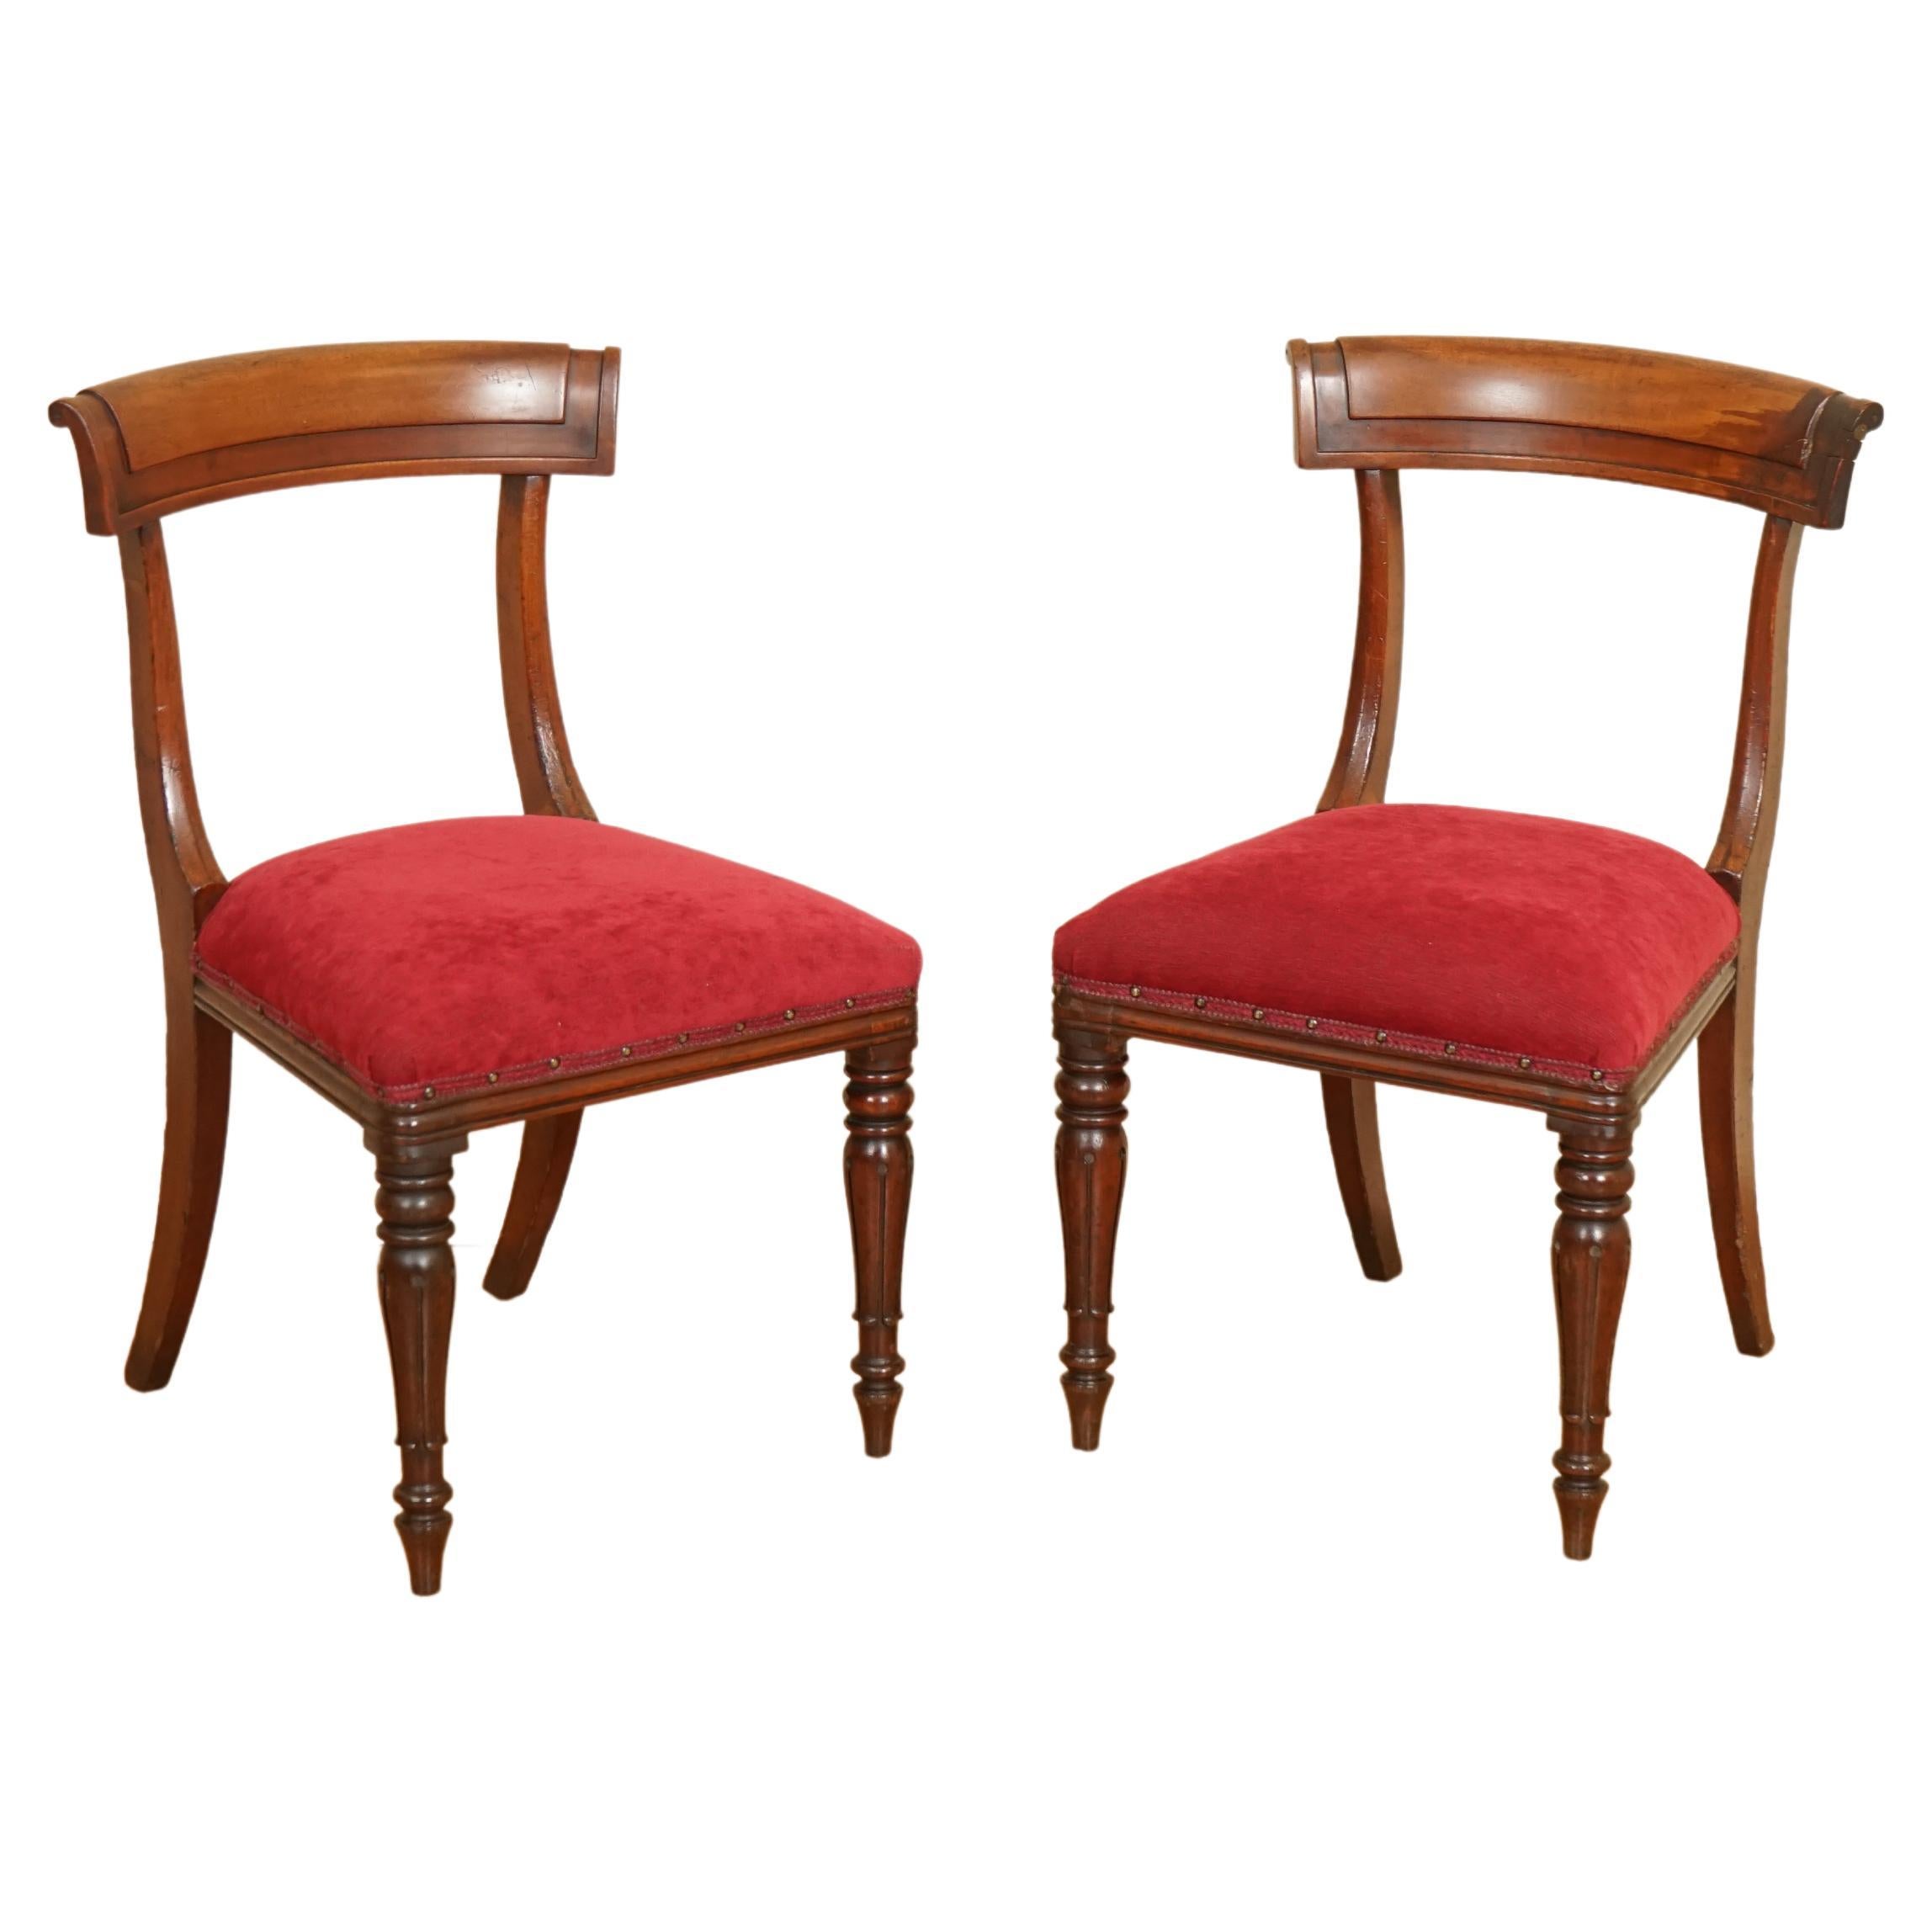 Pair of Victorian Red Fabric Upholstered Side Dining Chairs